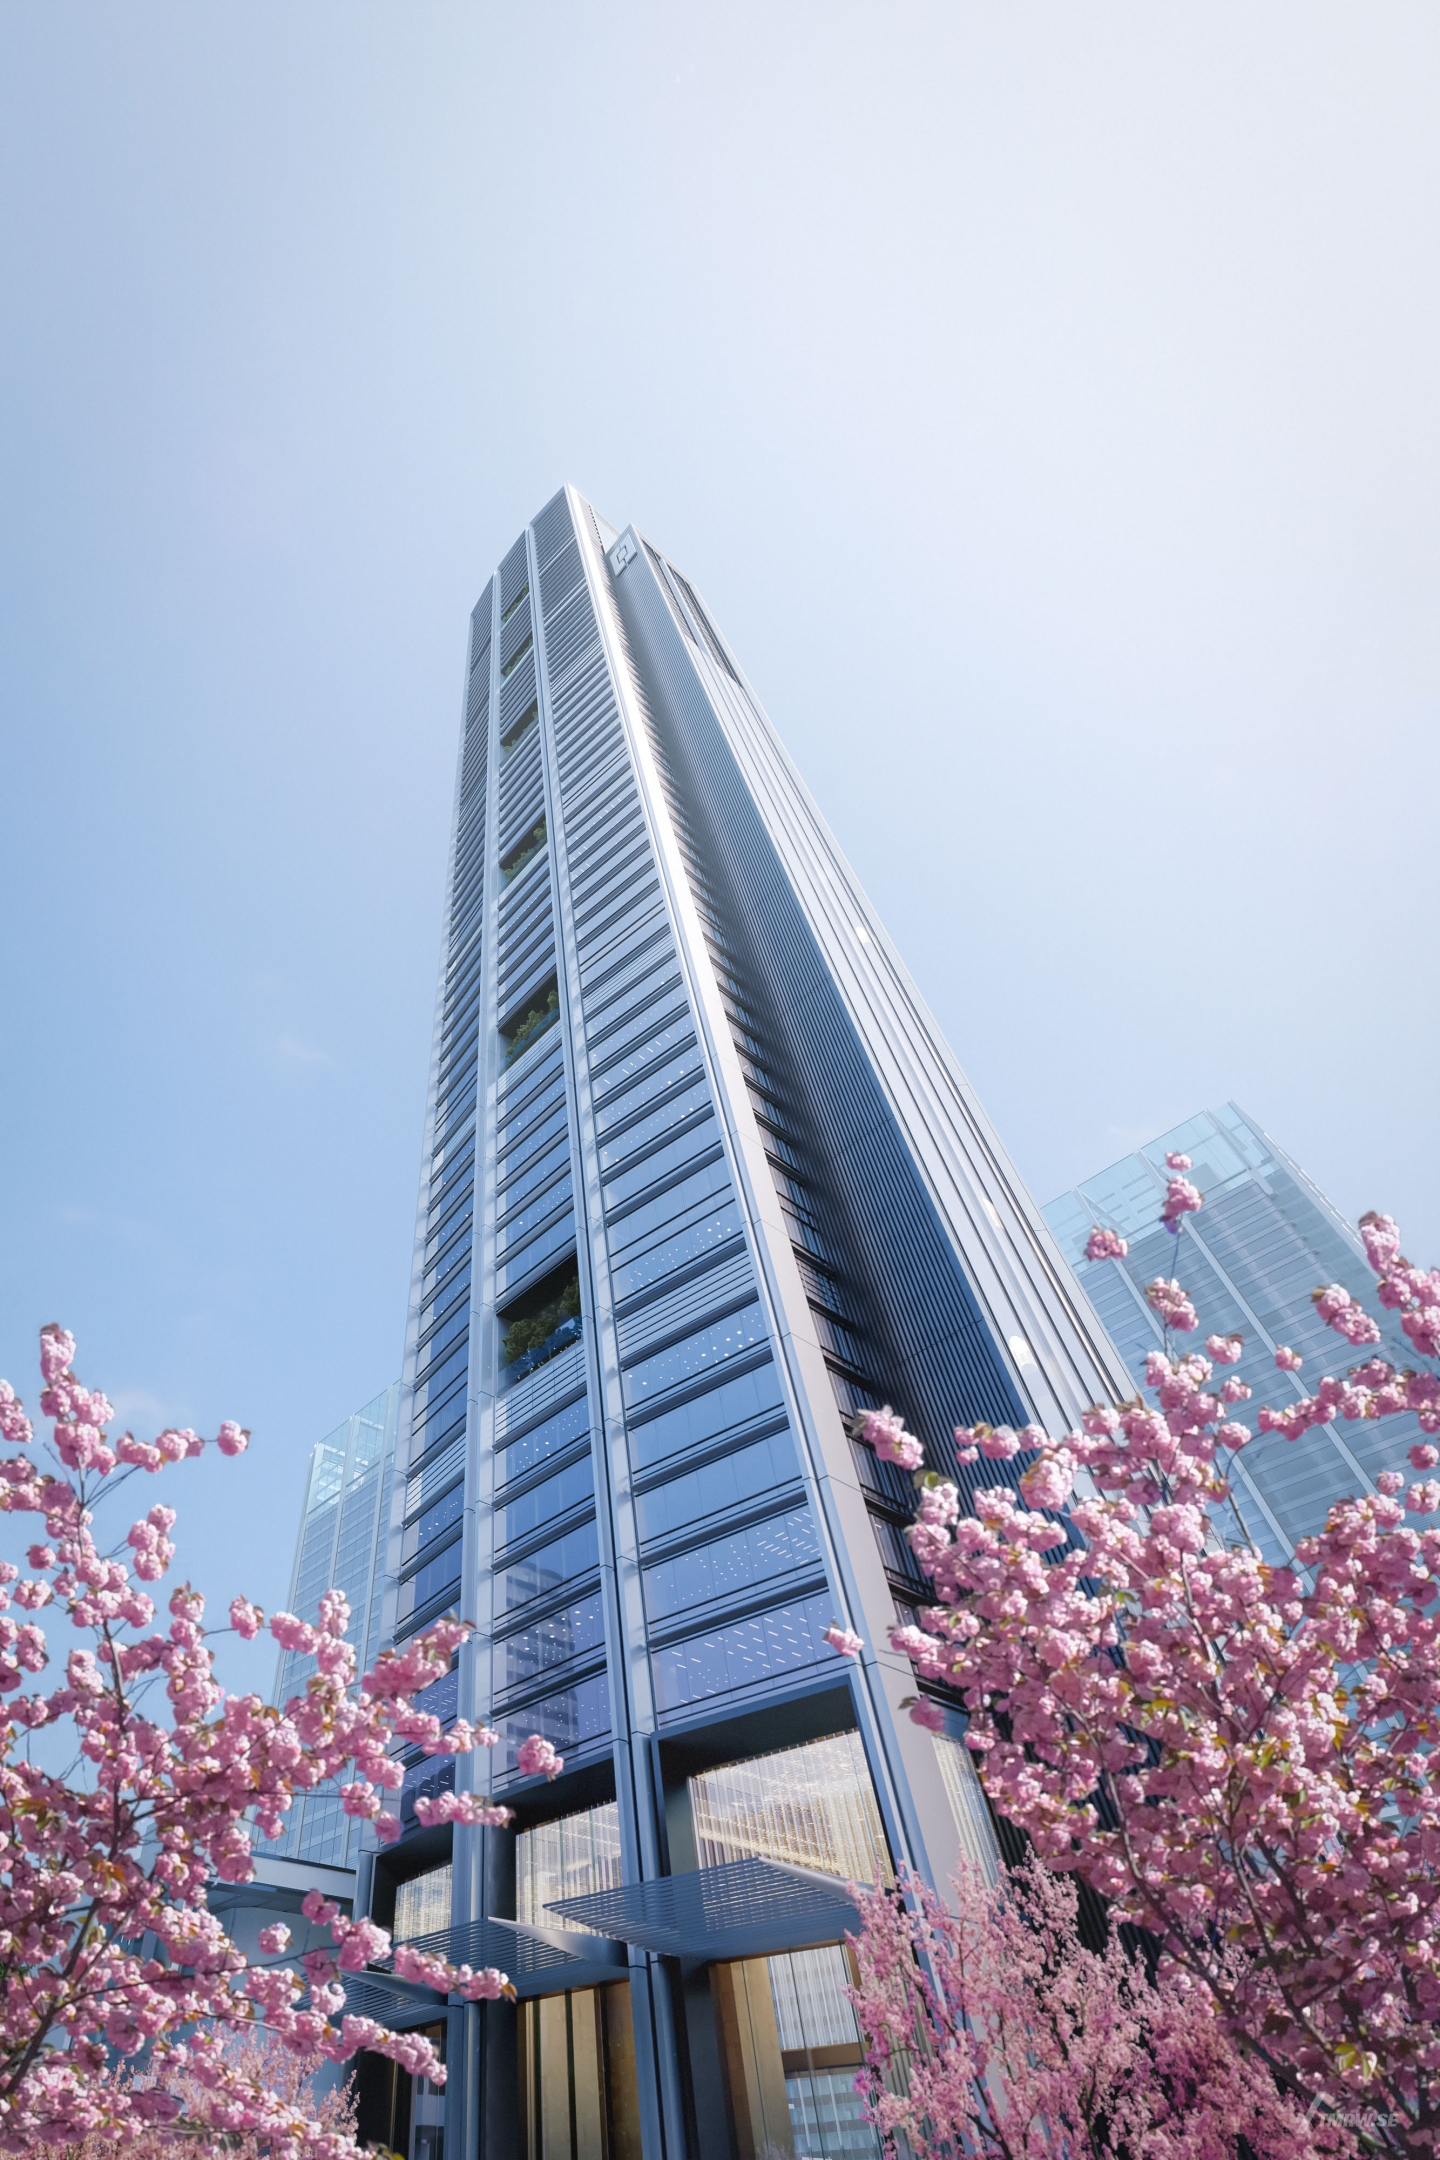 Architectural visualization of Hengli for Foster + Partners. An image of the exterior of a office building with glass facade from frog's perspective with cherry trees in front of in daylight.